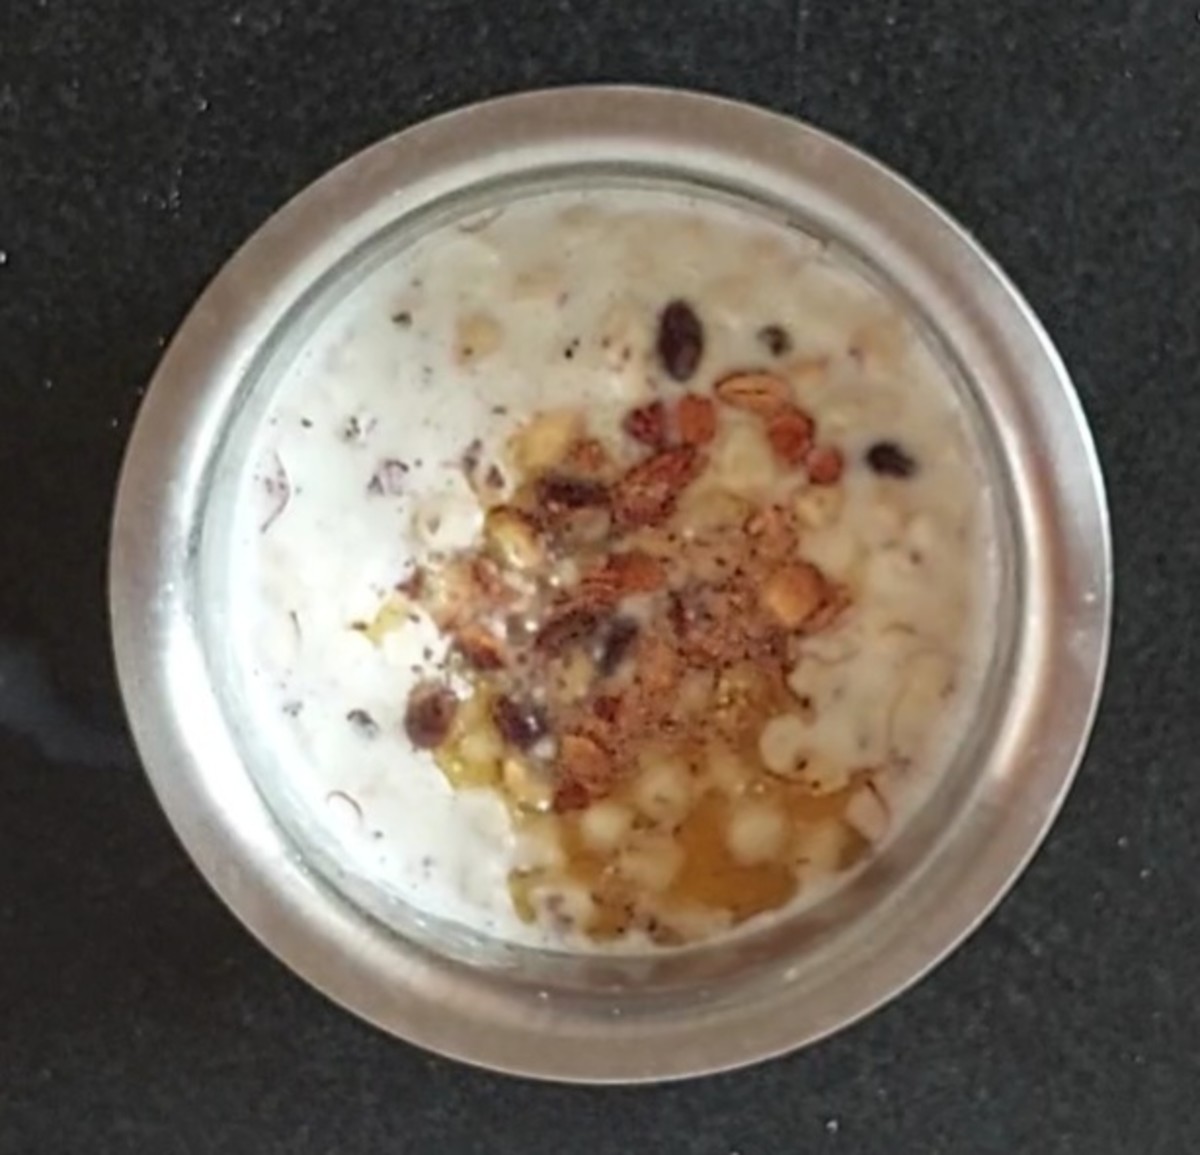 Add the nuts and raisins to kheer.